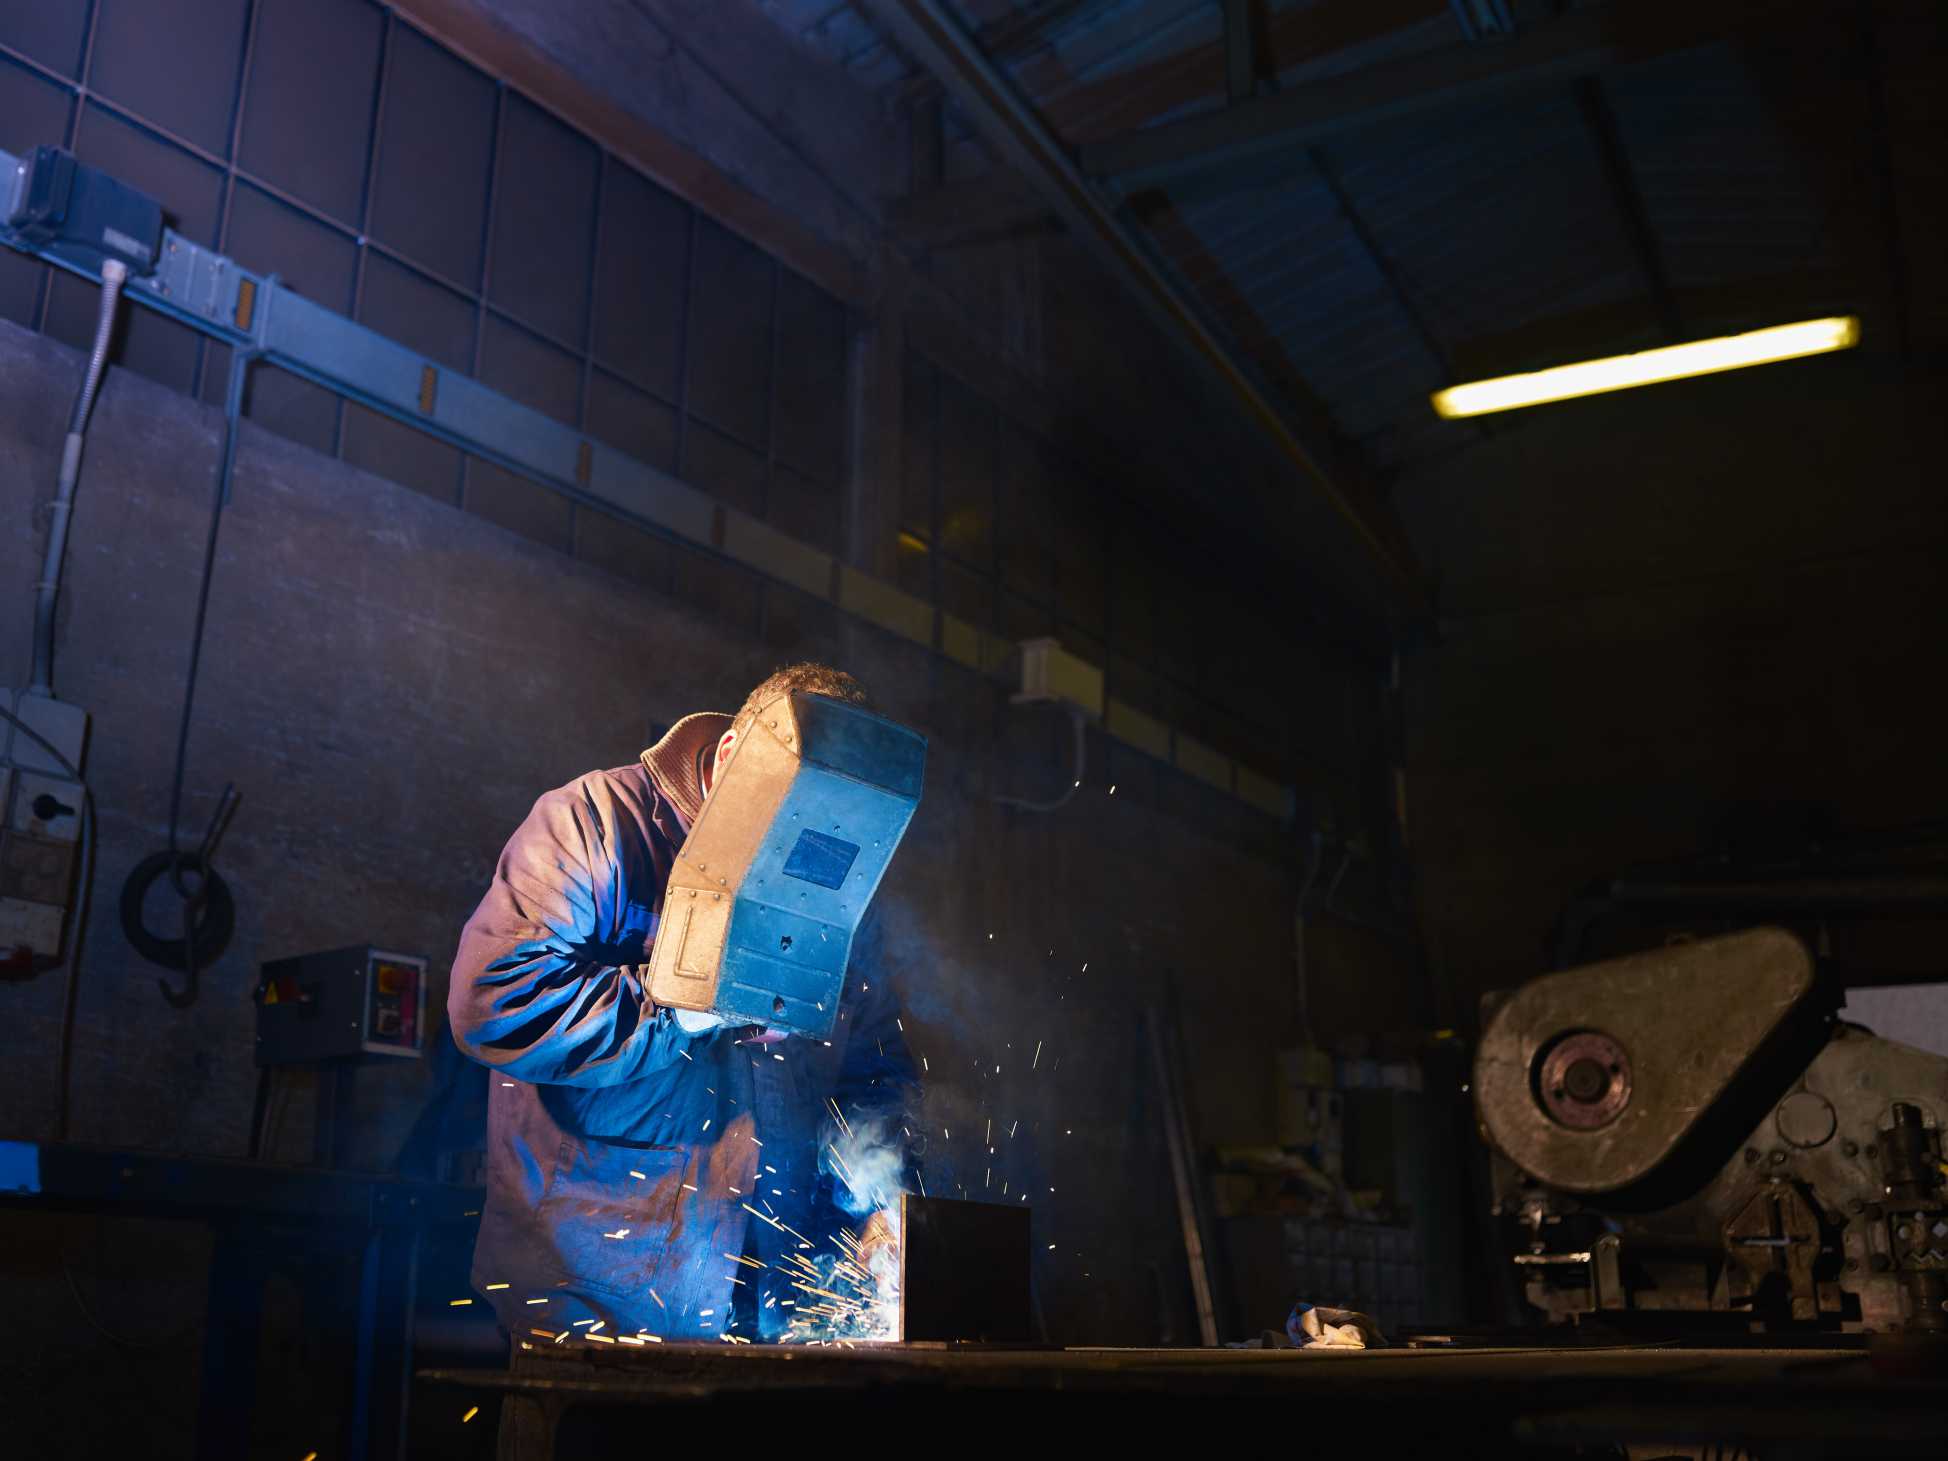 Manual worker in steel factory using welding mask, tools and machinery on metal. Horizontal shape, side view, waist up